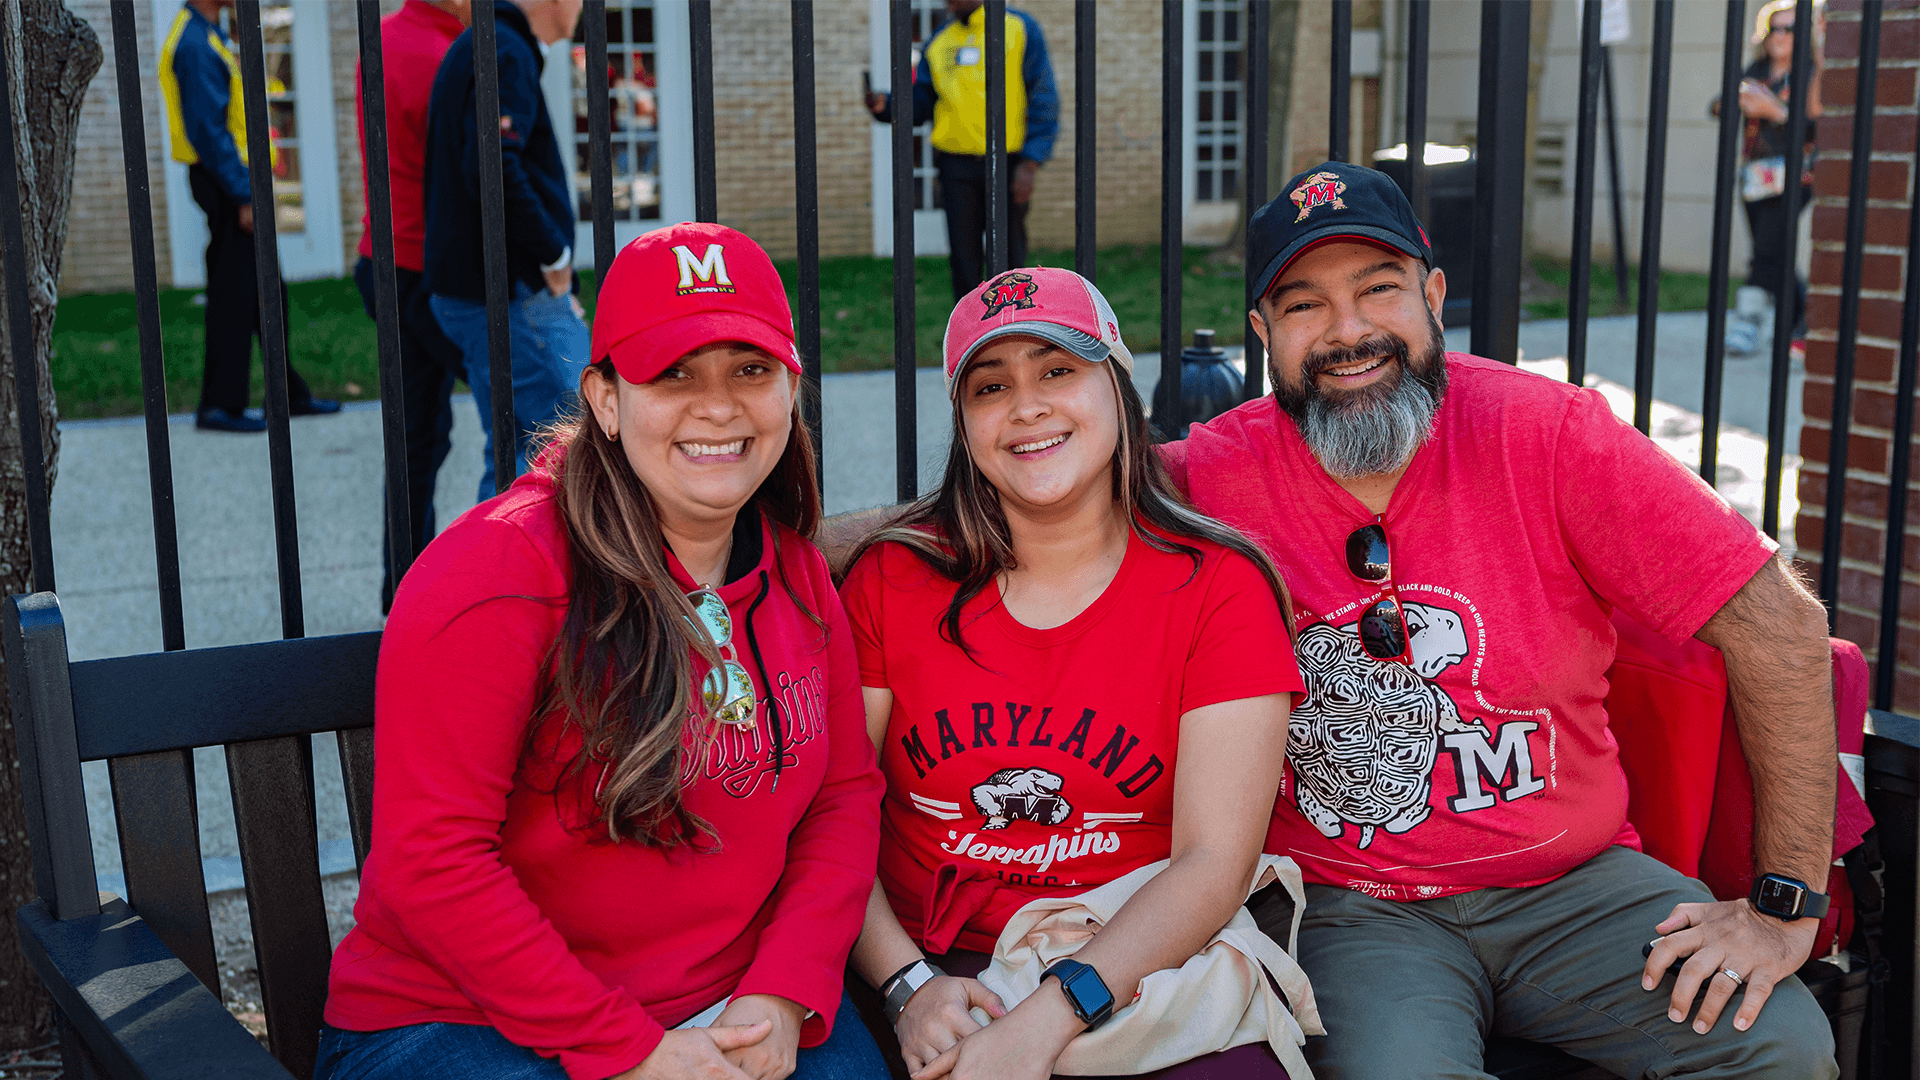 Three Maryland graduates decked out in red enjoy the Alumni Tailgate and Beer Garden at Riggs Alumni Center.